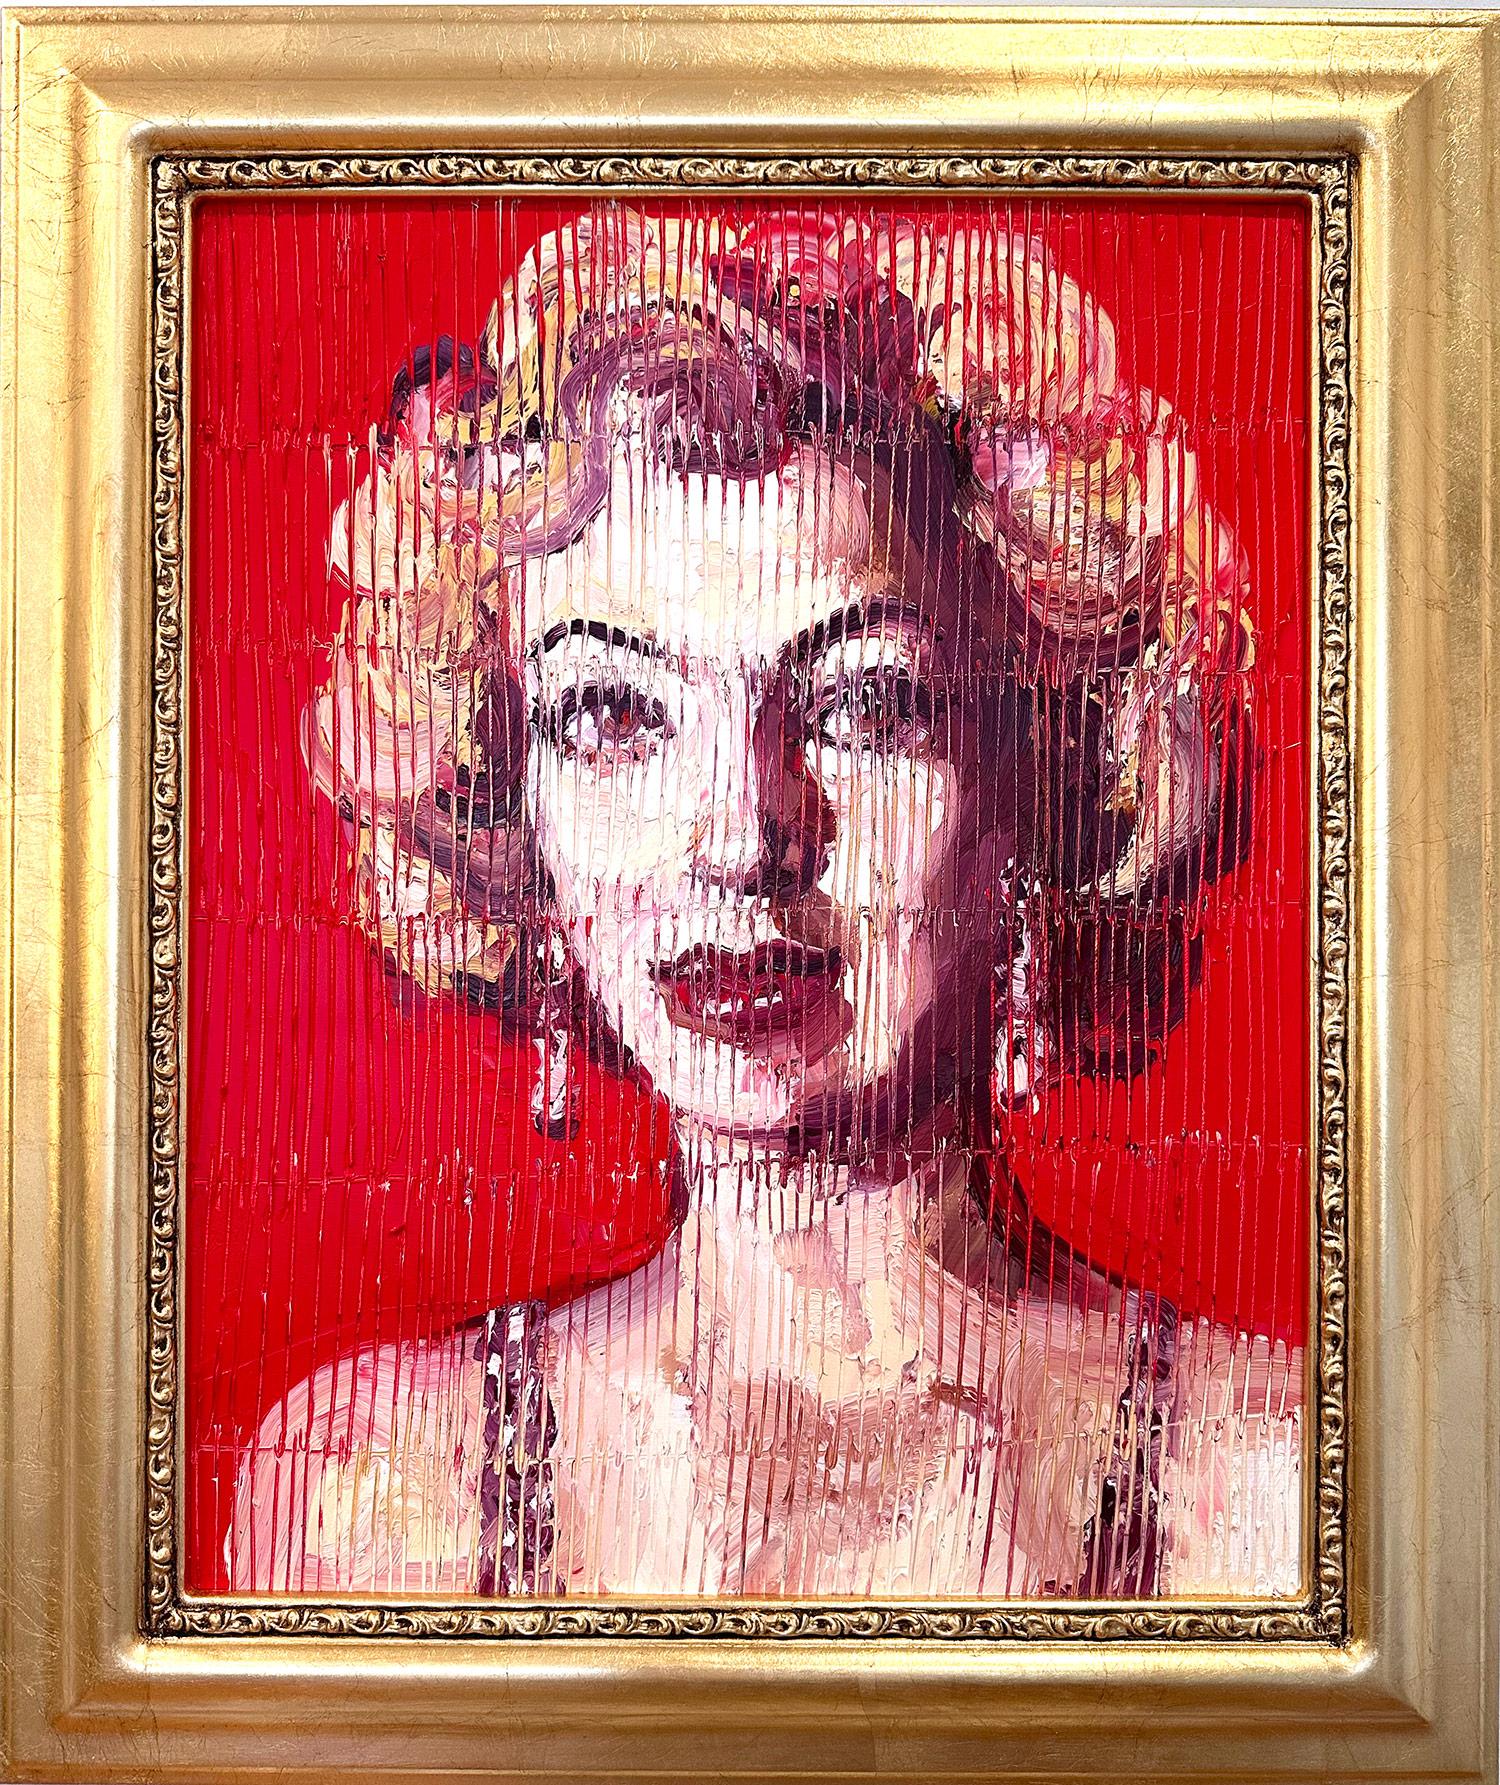 Hunt Slonem Figurative Painting - "Marilyn Monroe Red" Neo-Expressionist Oil Painting Red Background on Wood Panel